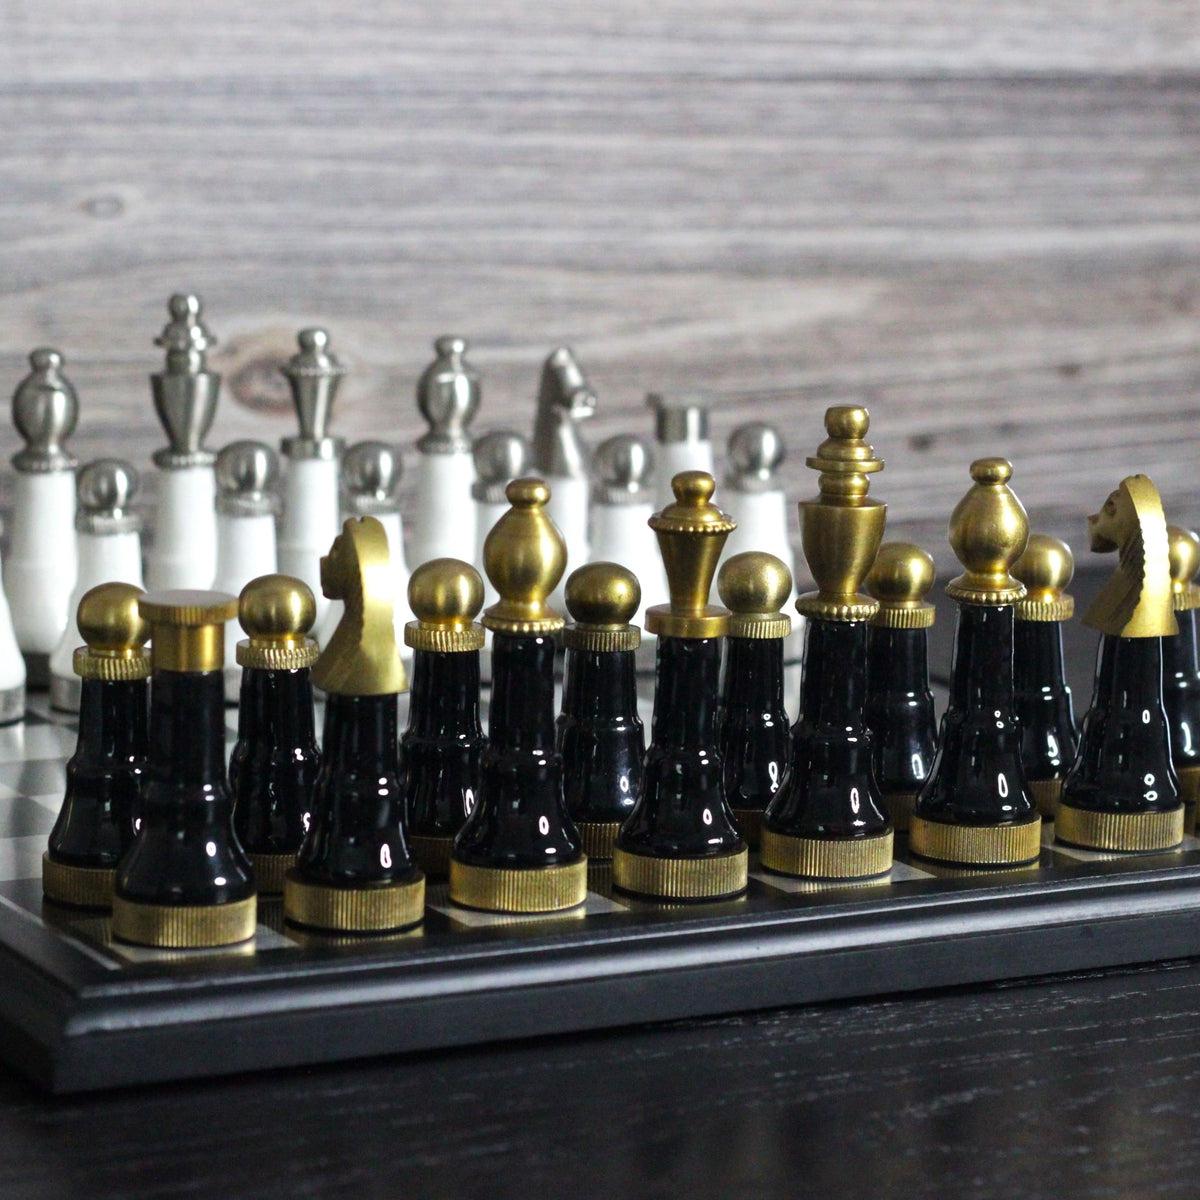 The Budapest Gambit - Black and White Metallic Chess Set - Marble Cultures